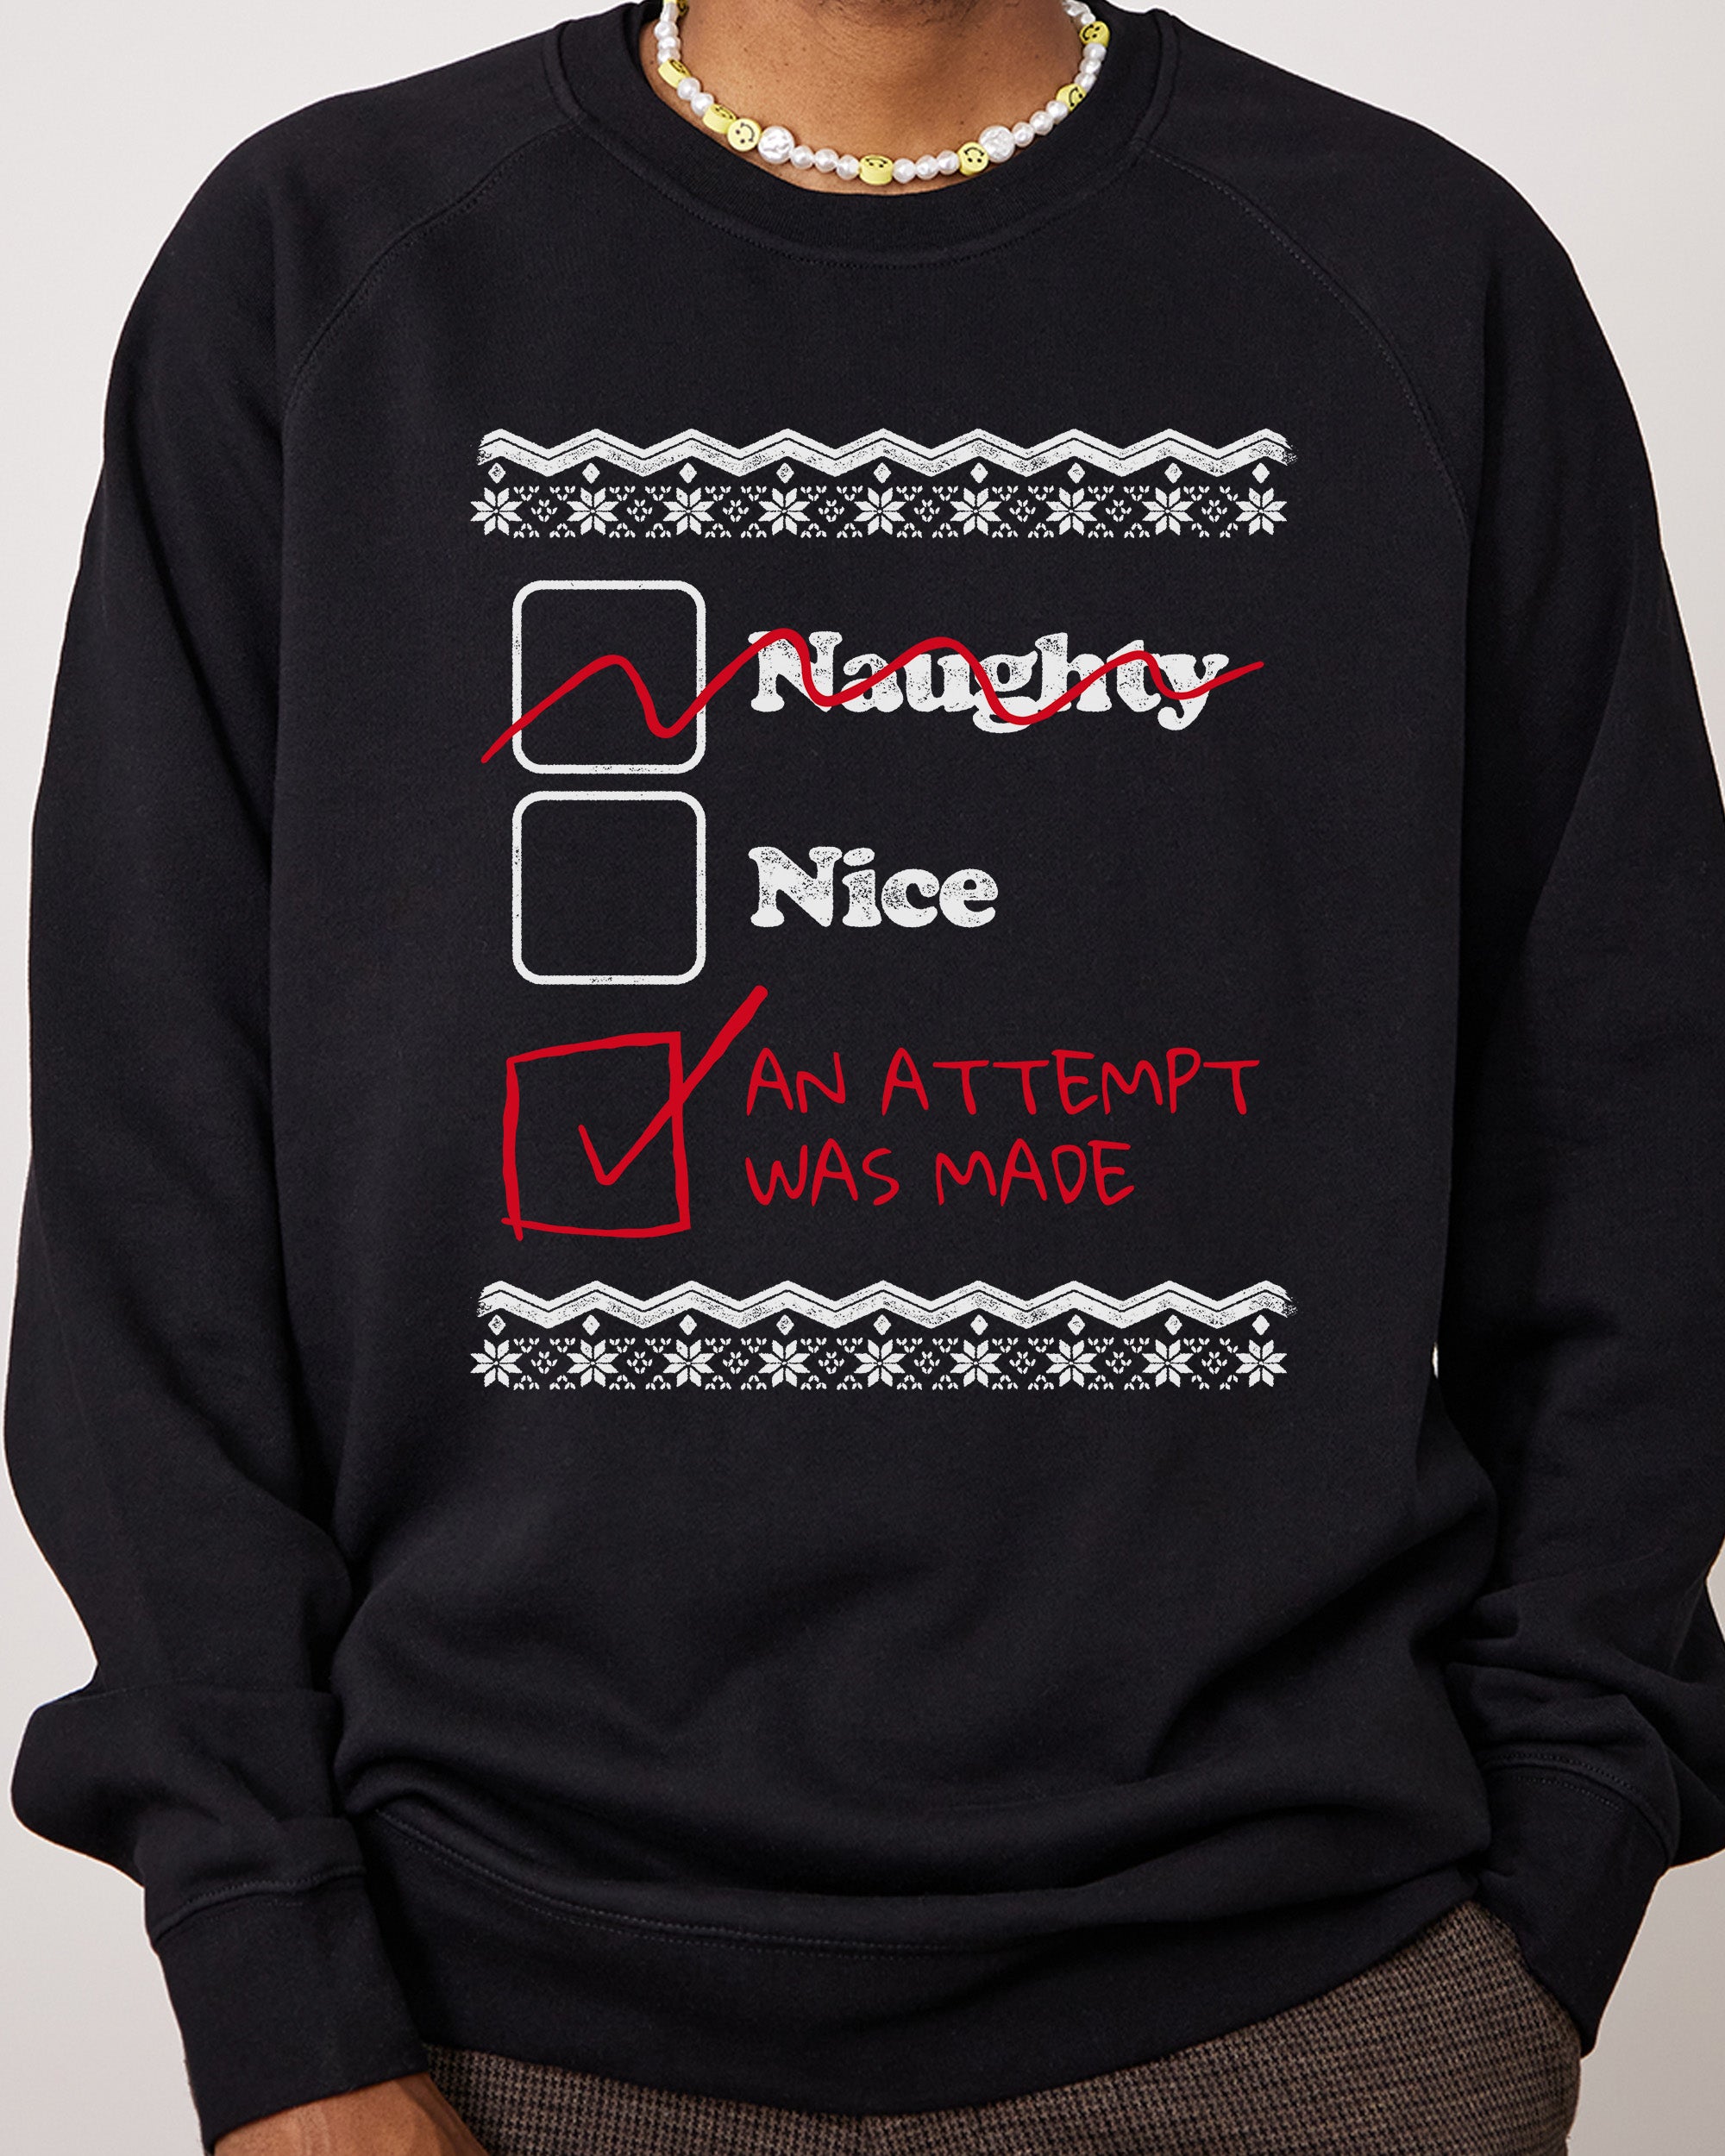 Naughty Nice an Attempt was Made Jumper